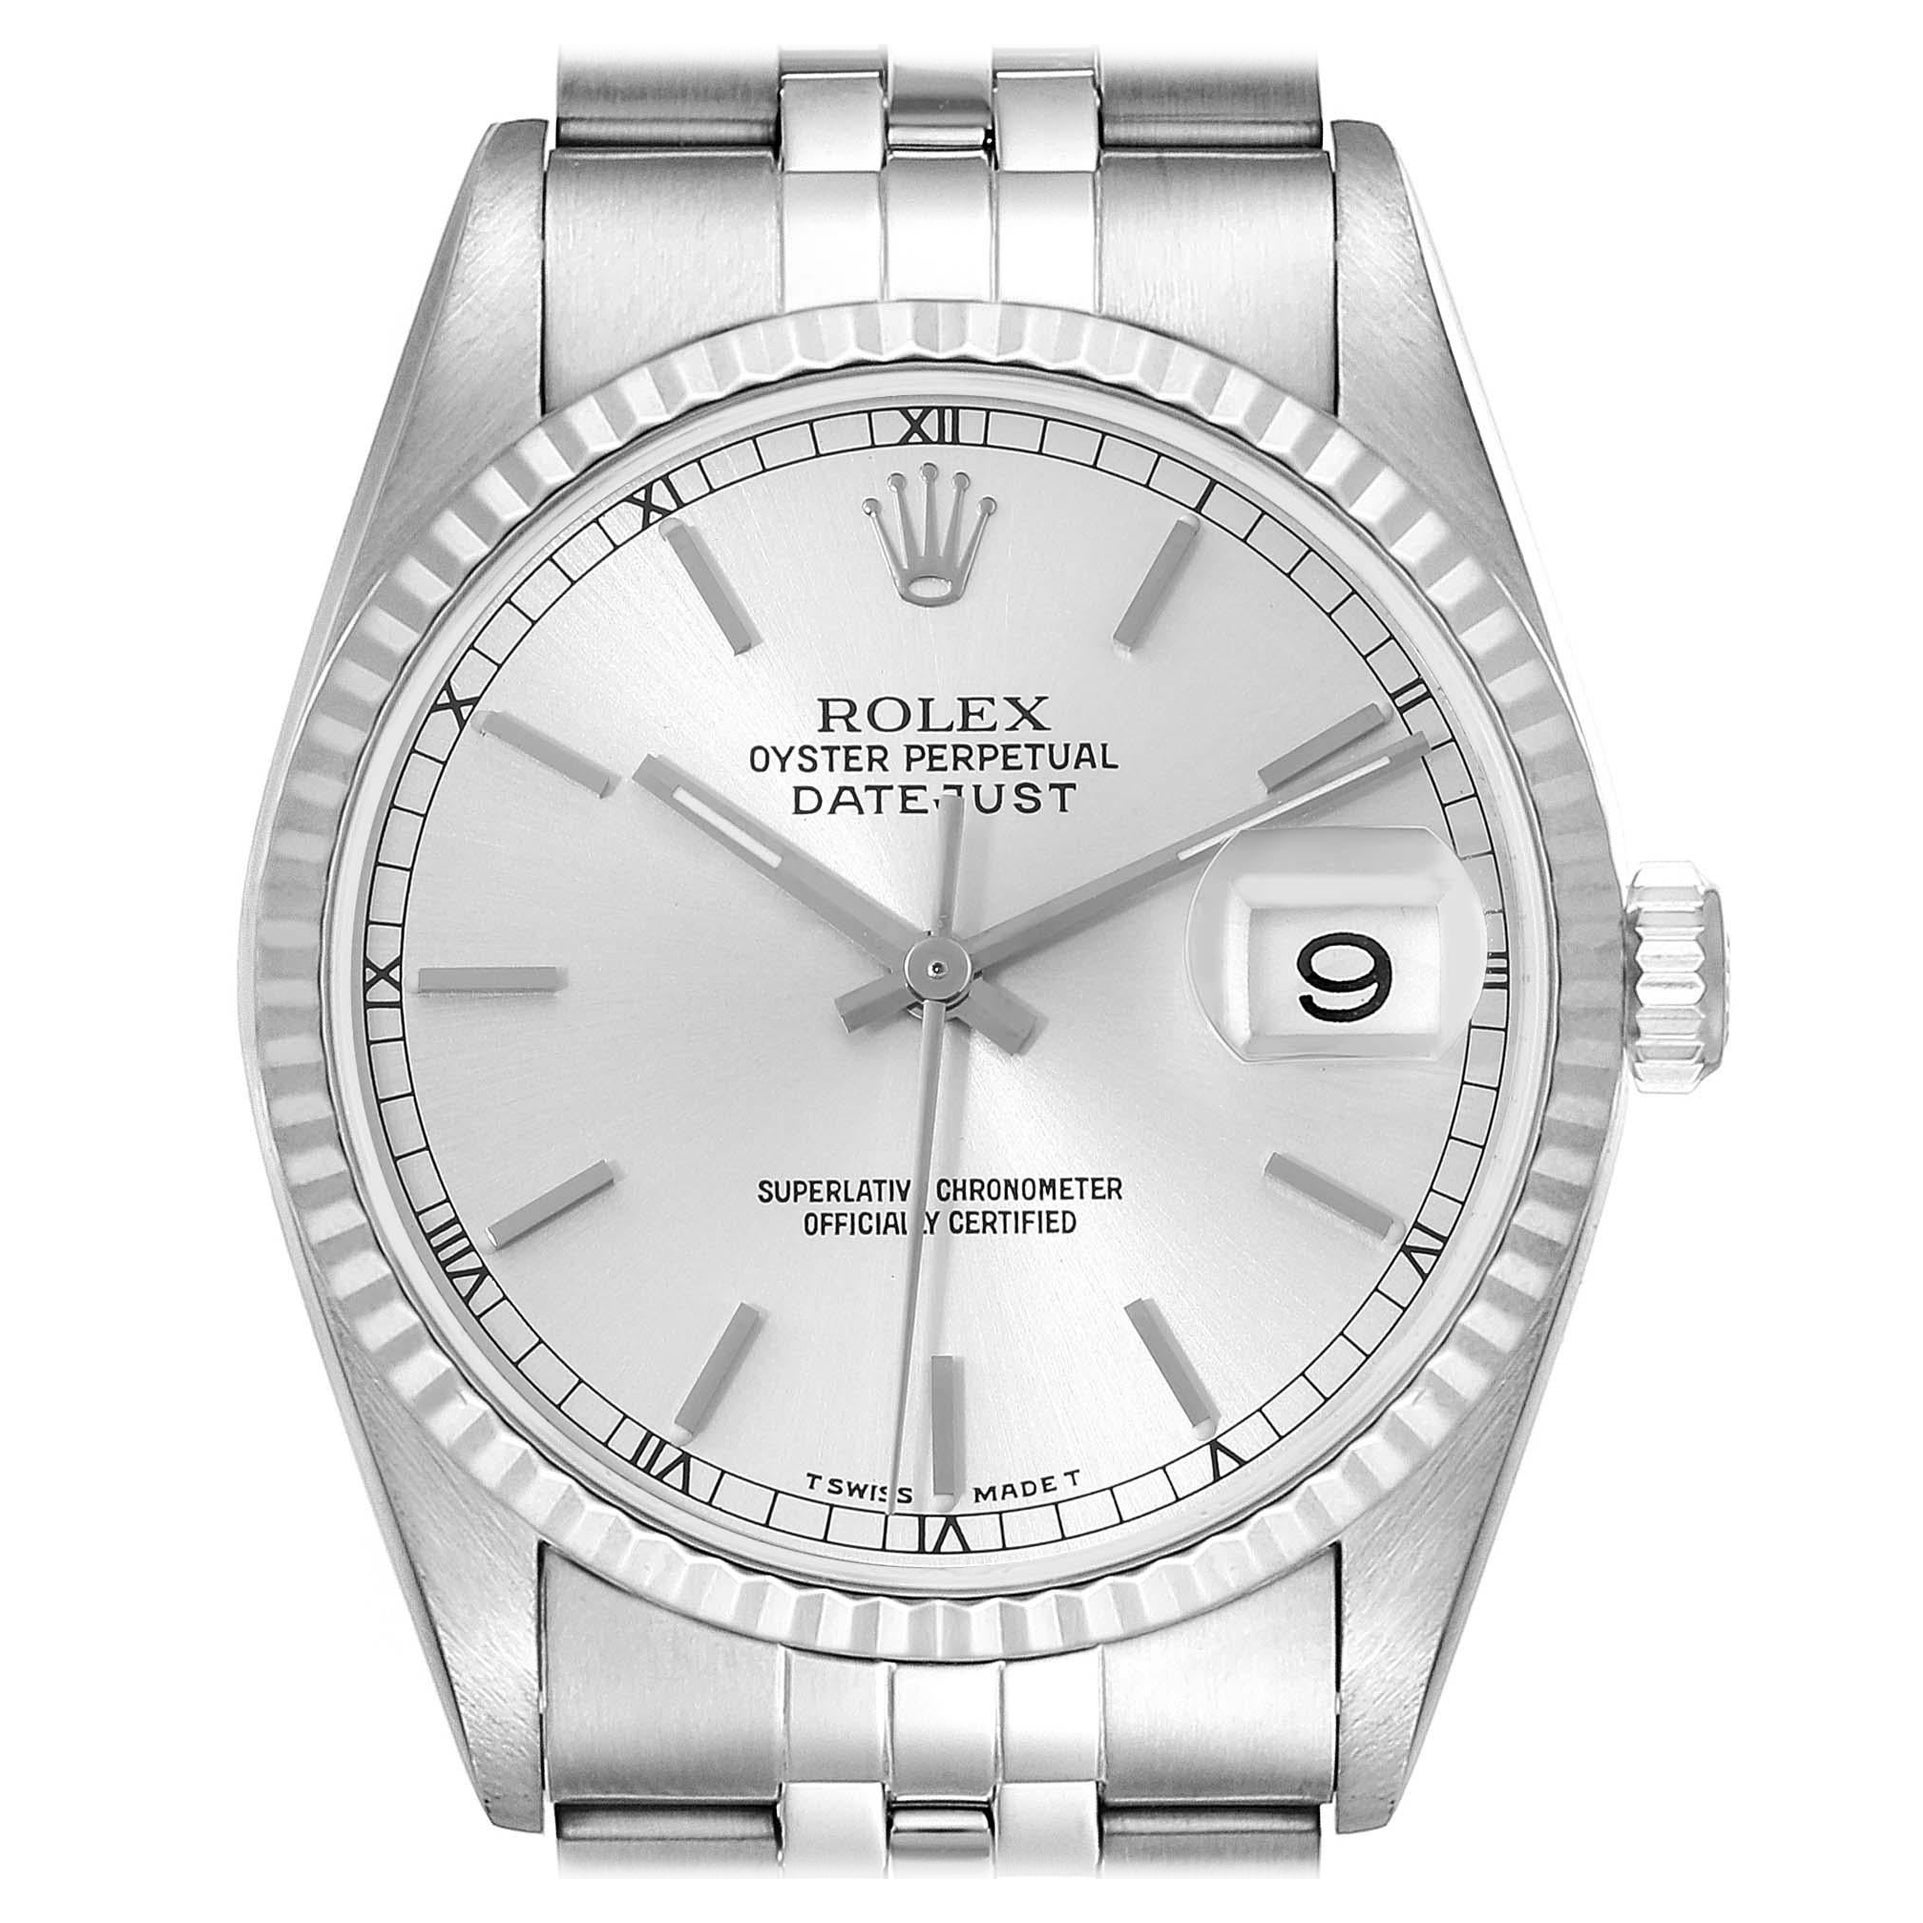 Rolex Datejust Silver Dial Steel White Gold Mens Watch 16234 For Sale